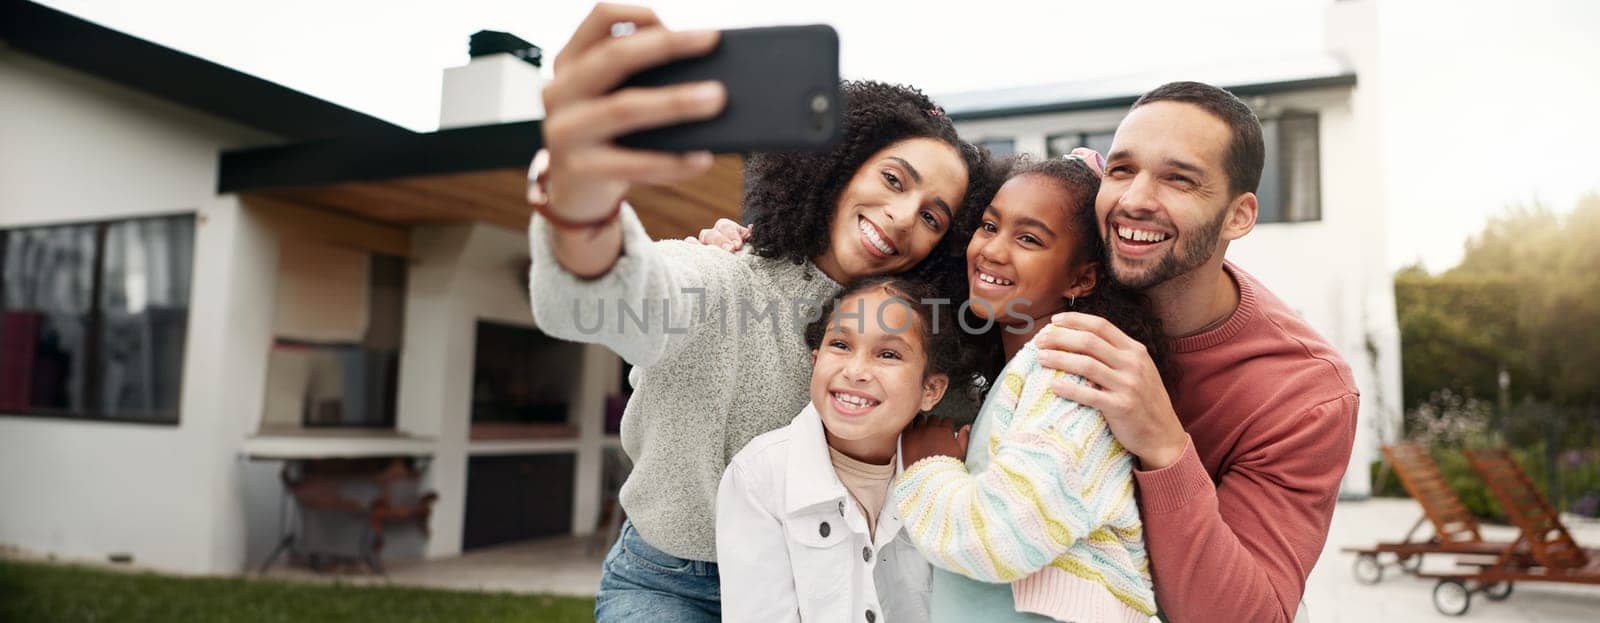 Children, family and selfie outdoor with a smile, love and care in home backyard. Young latino woman and man or parents hug happy girl kids for a profile picture or social media post on holiday by YuriArcurs